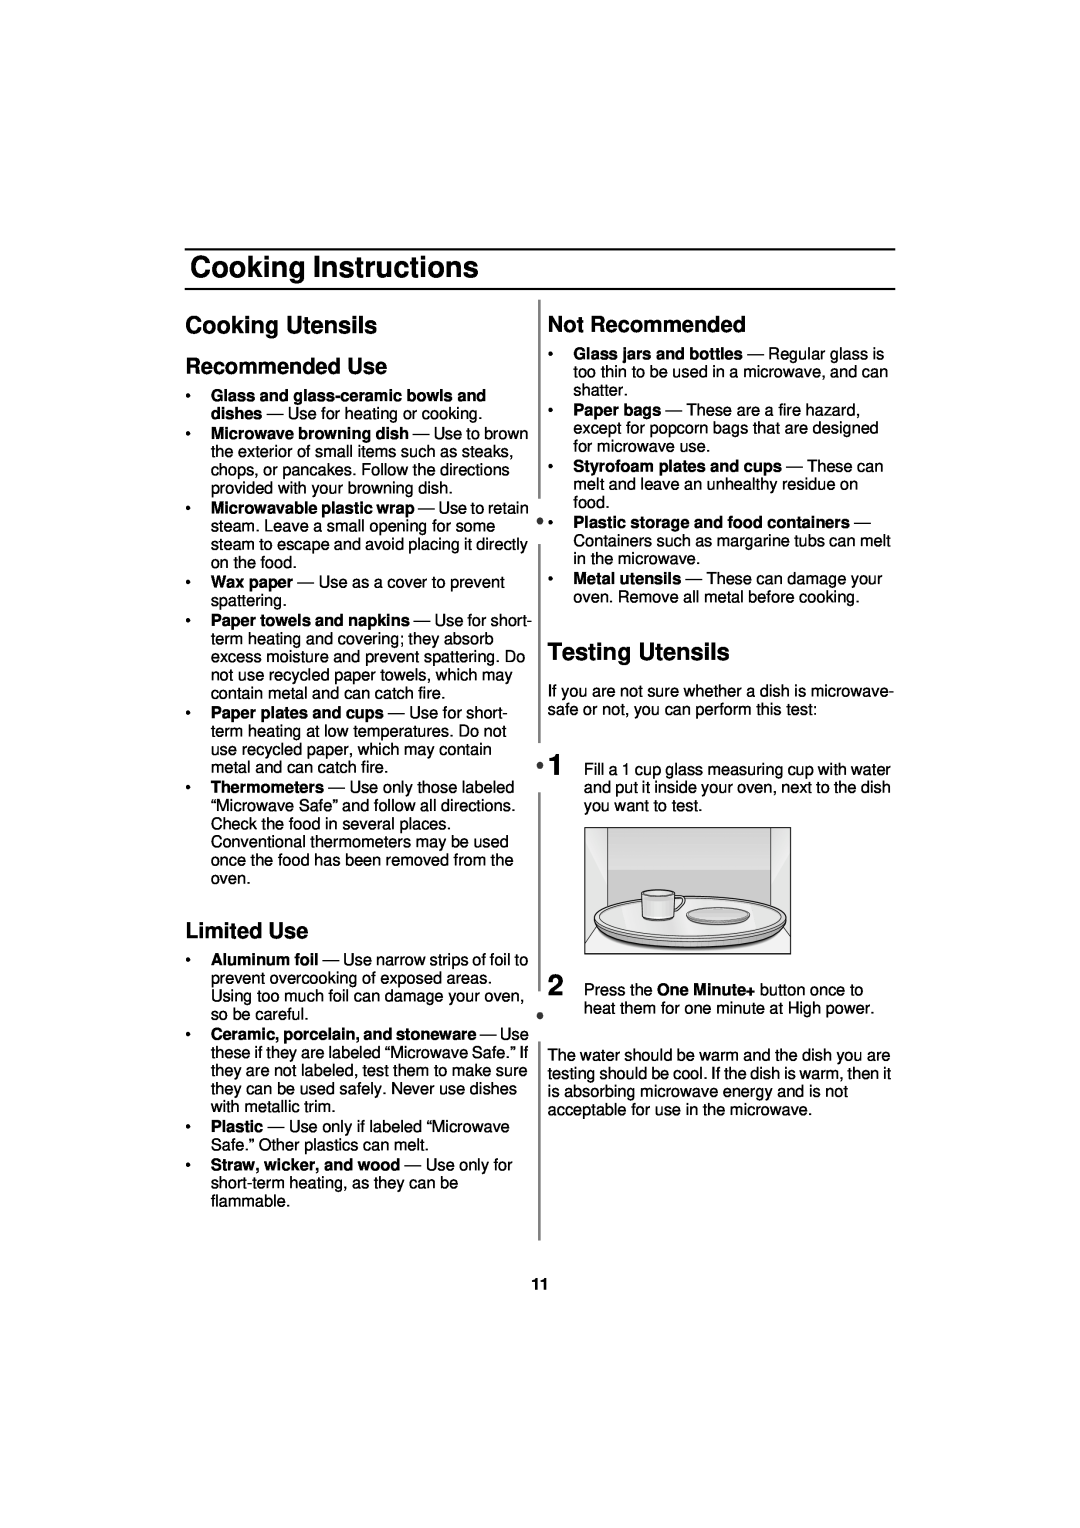 Samsung MW830WA Cooking Instructions, Cooking Utensils, Testing Utensils, Not Recommended, Recommended Use, Limited Use 